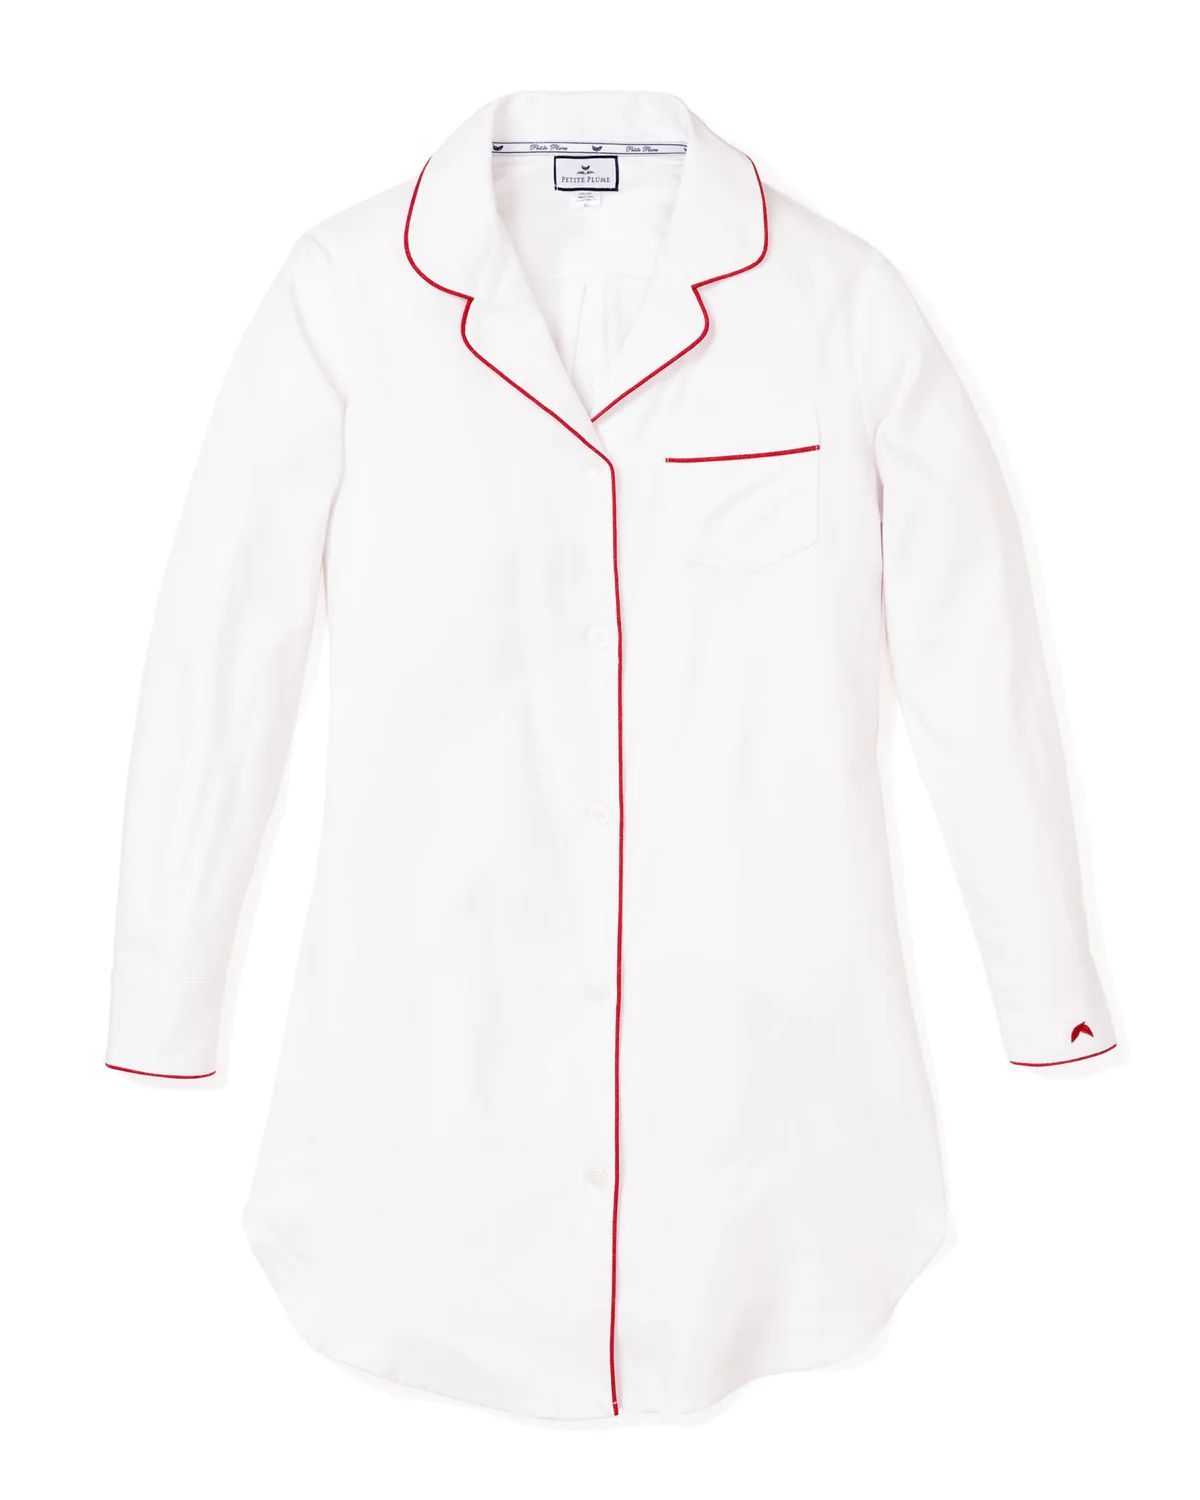 Women's White Twill Nightshirt with Red Piping | Over The Moon